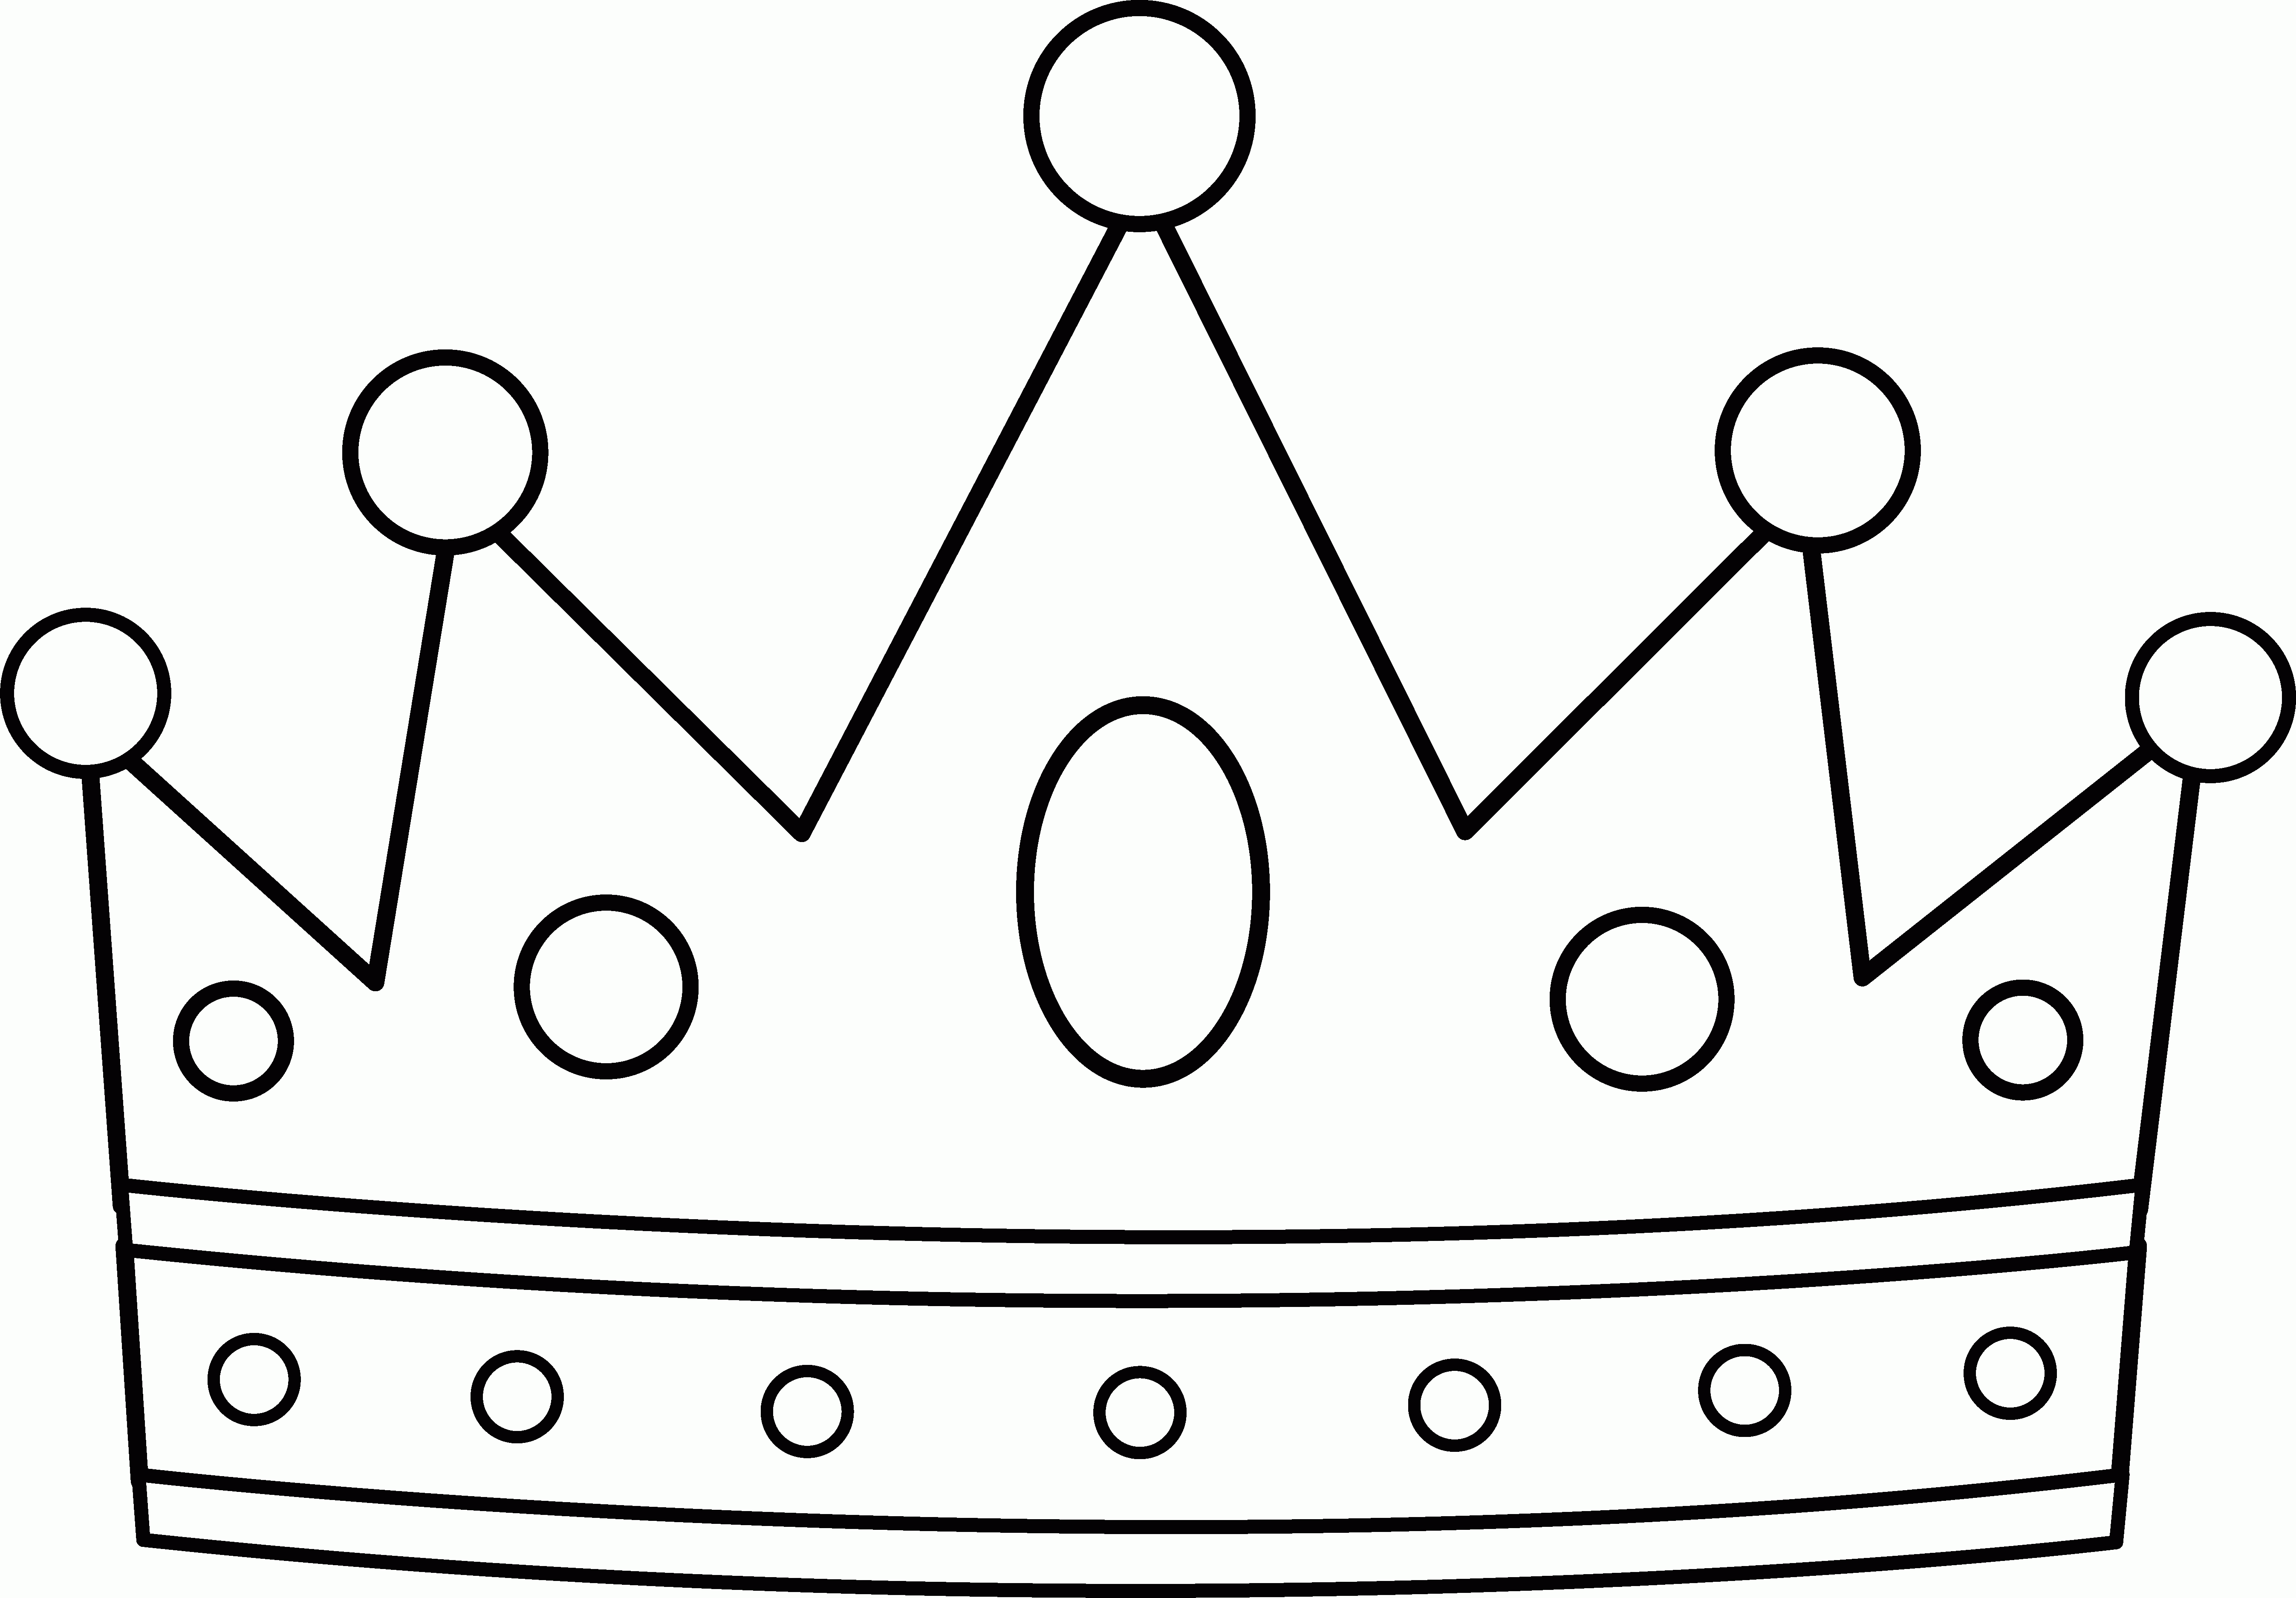 Crown Coloring Page   Mugudvrlistscom   Coloring Home